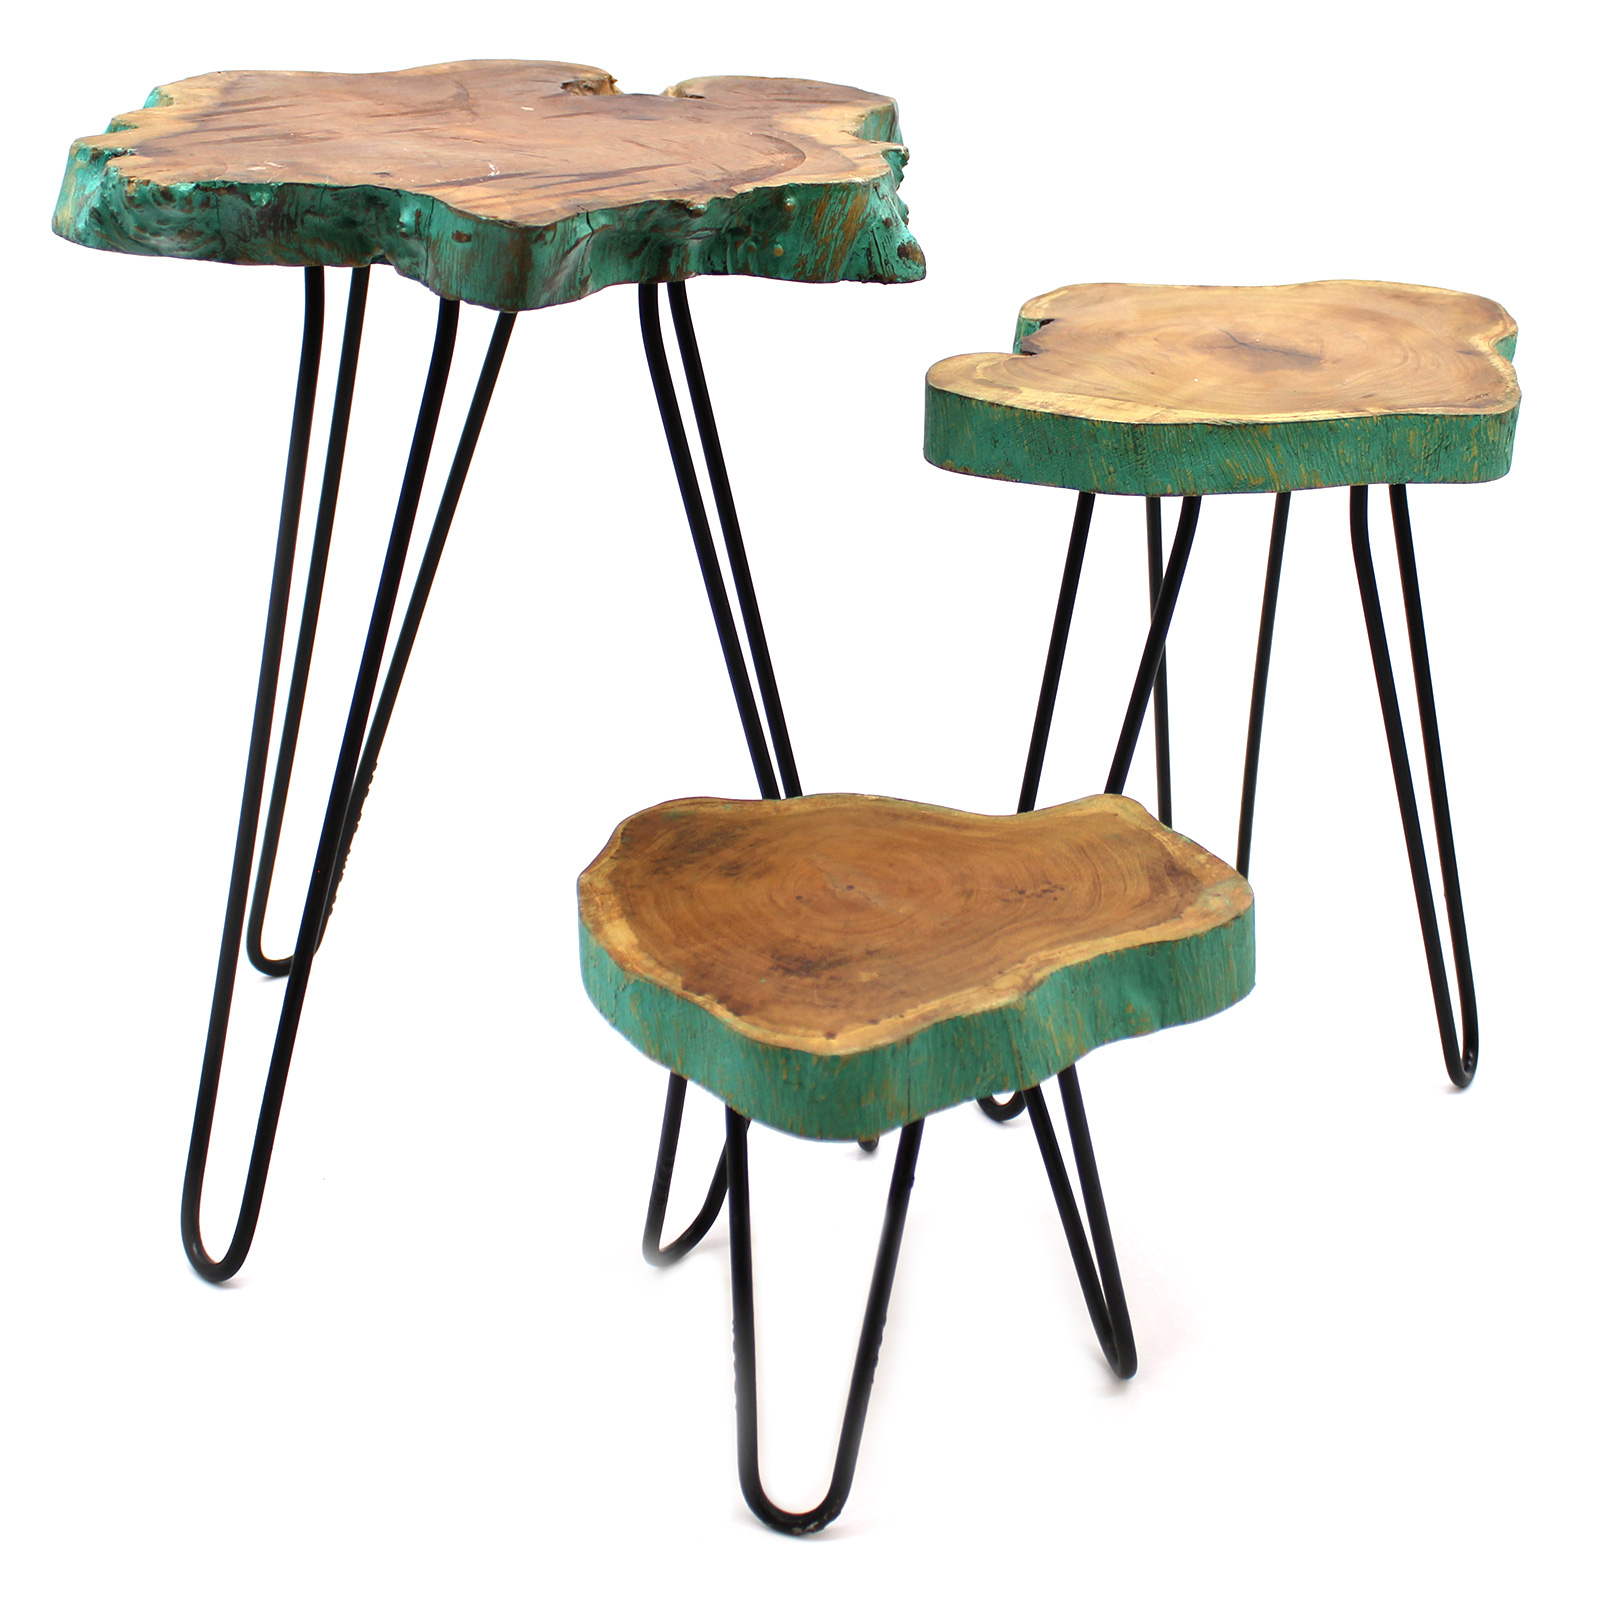 Set of 3 Gamal Wood Plant Stands - Greenwash - Click Image to Close